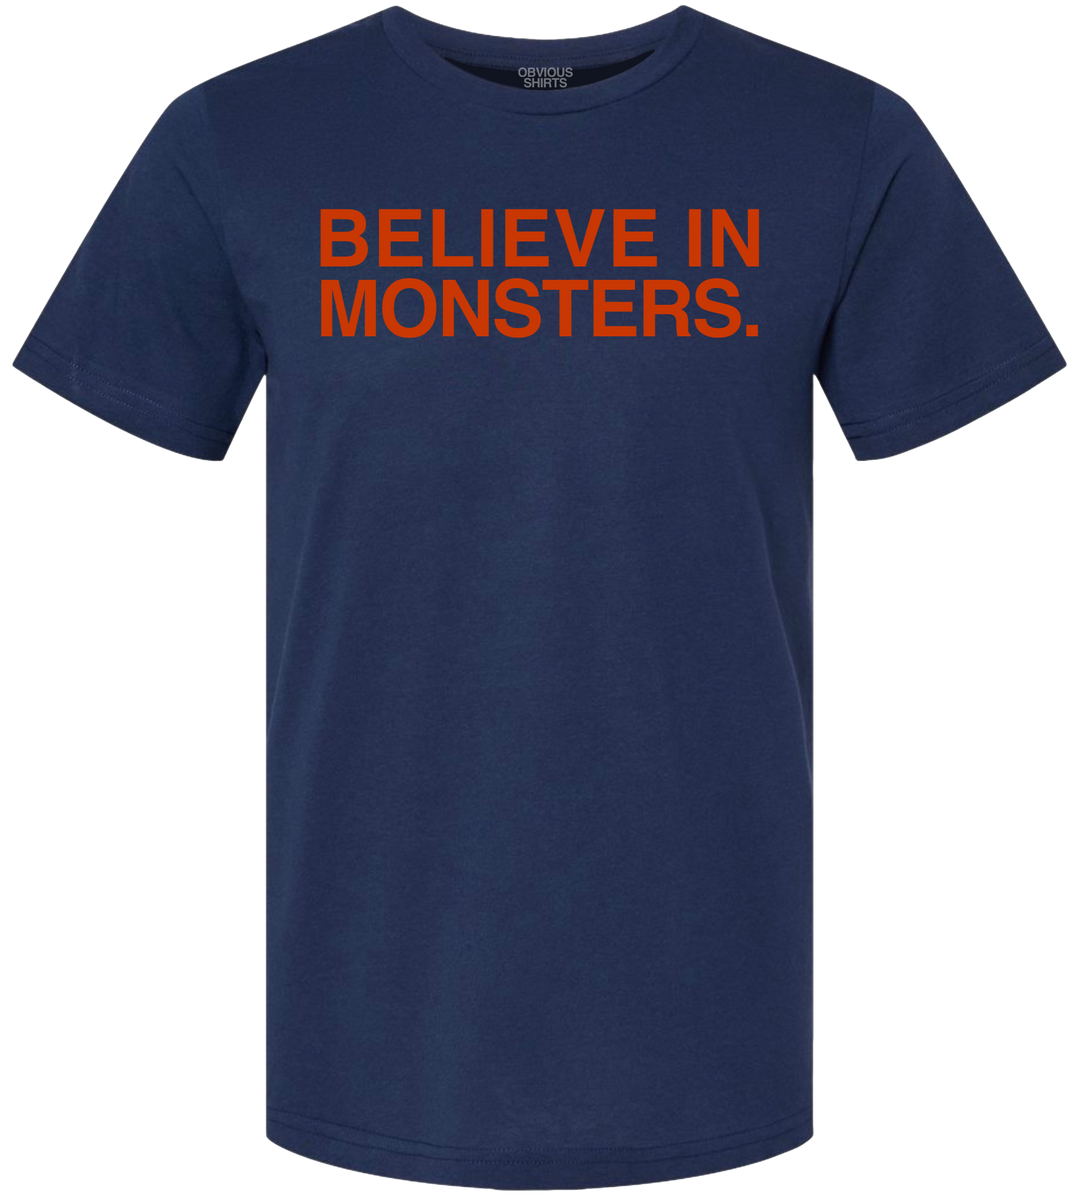 BELIEVE IN MONSTERS. - OBVIOUS SHIRTS